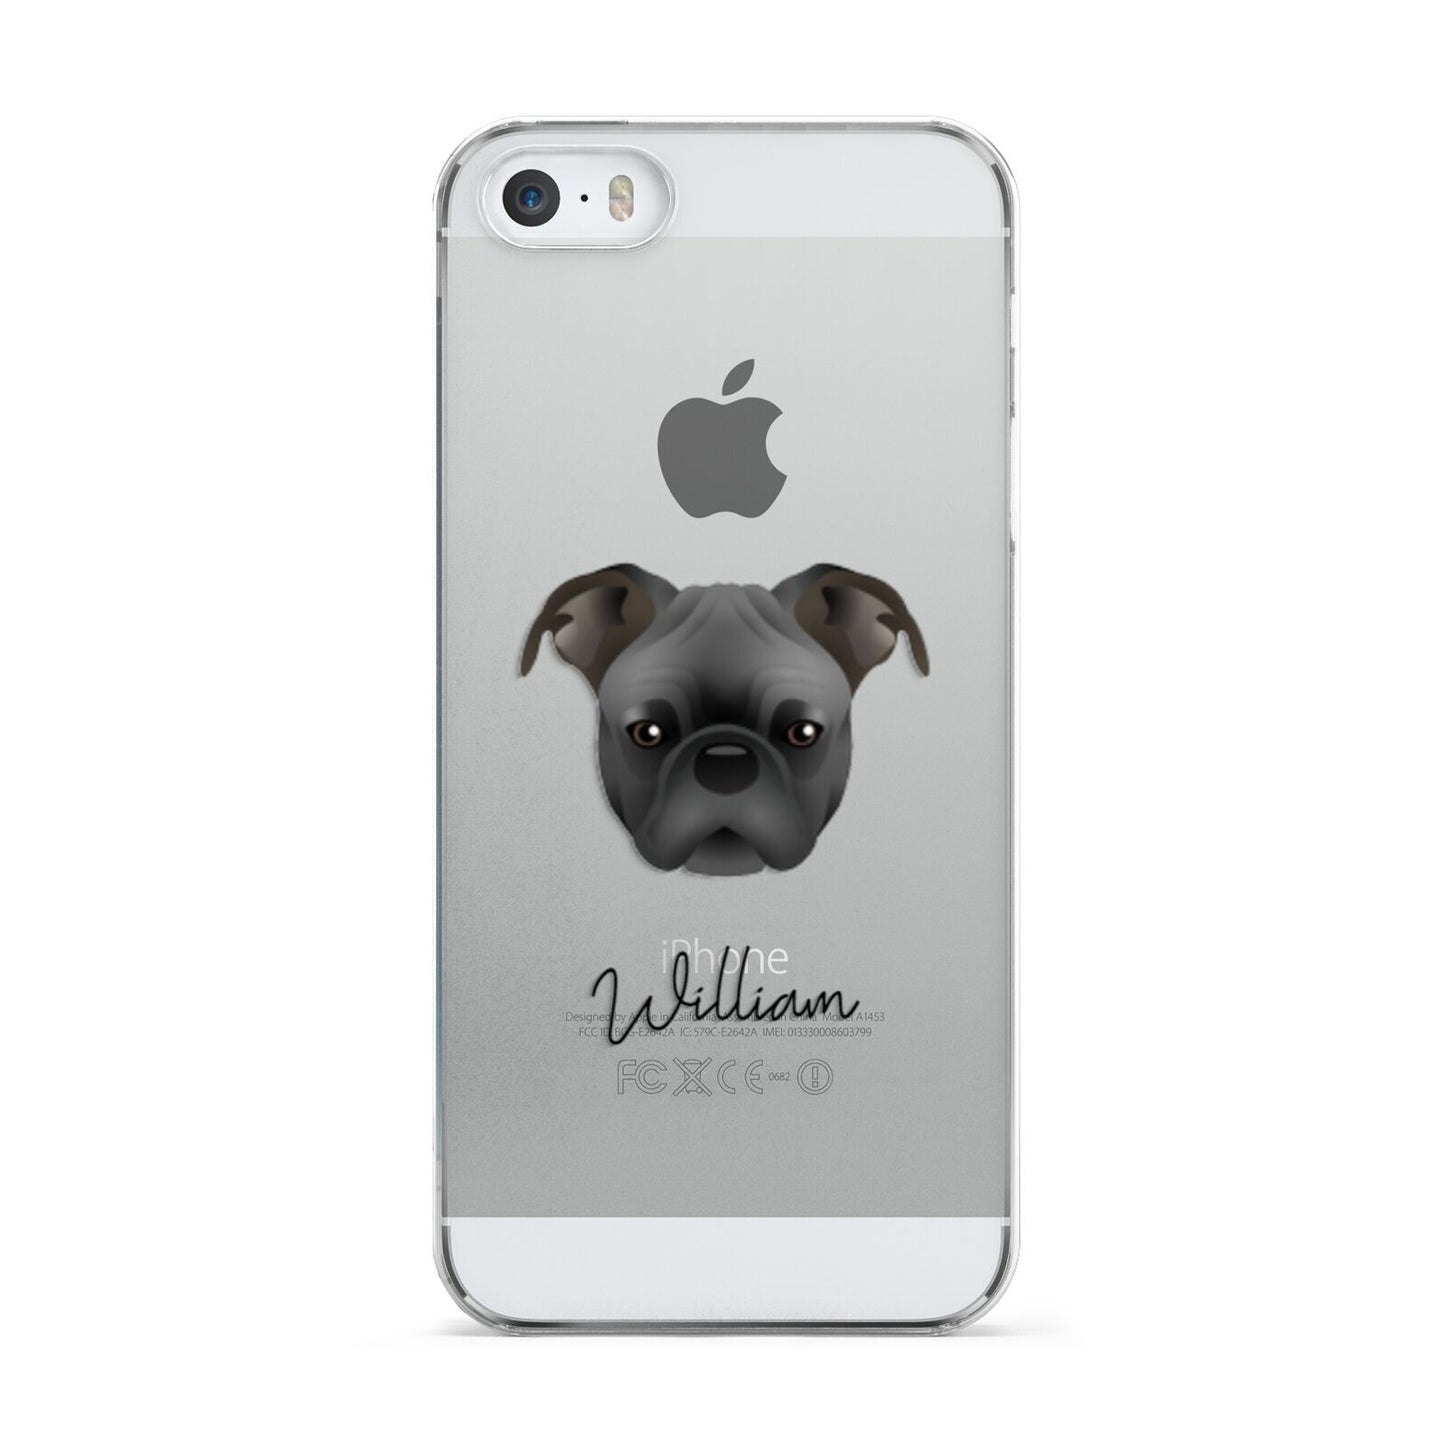 Bugg Personalised Apple iPhone 5 Case